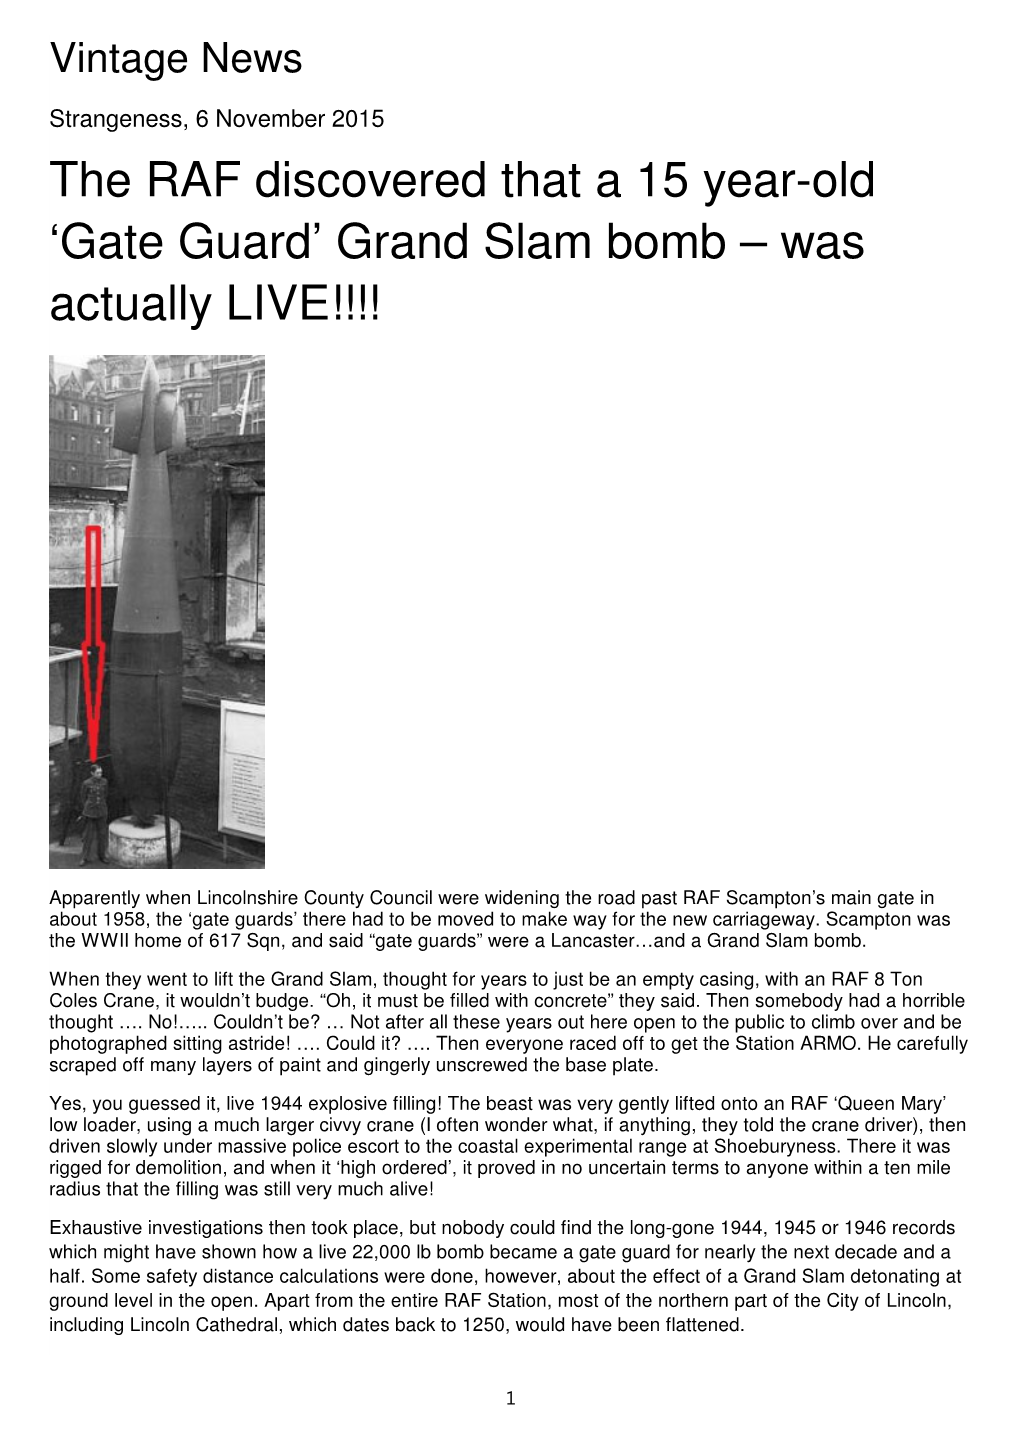 The RAF Discovered That a 15 Year-Old 'Gate Guard' Grand Slam Bomb – Was Actually LIVE!!!!